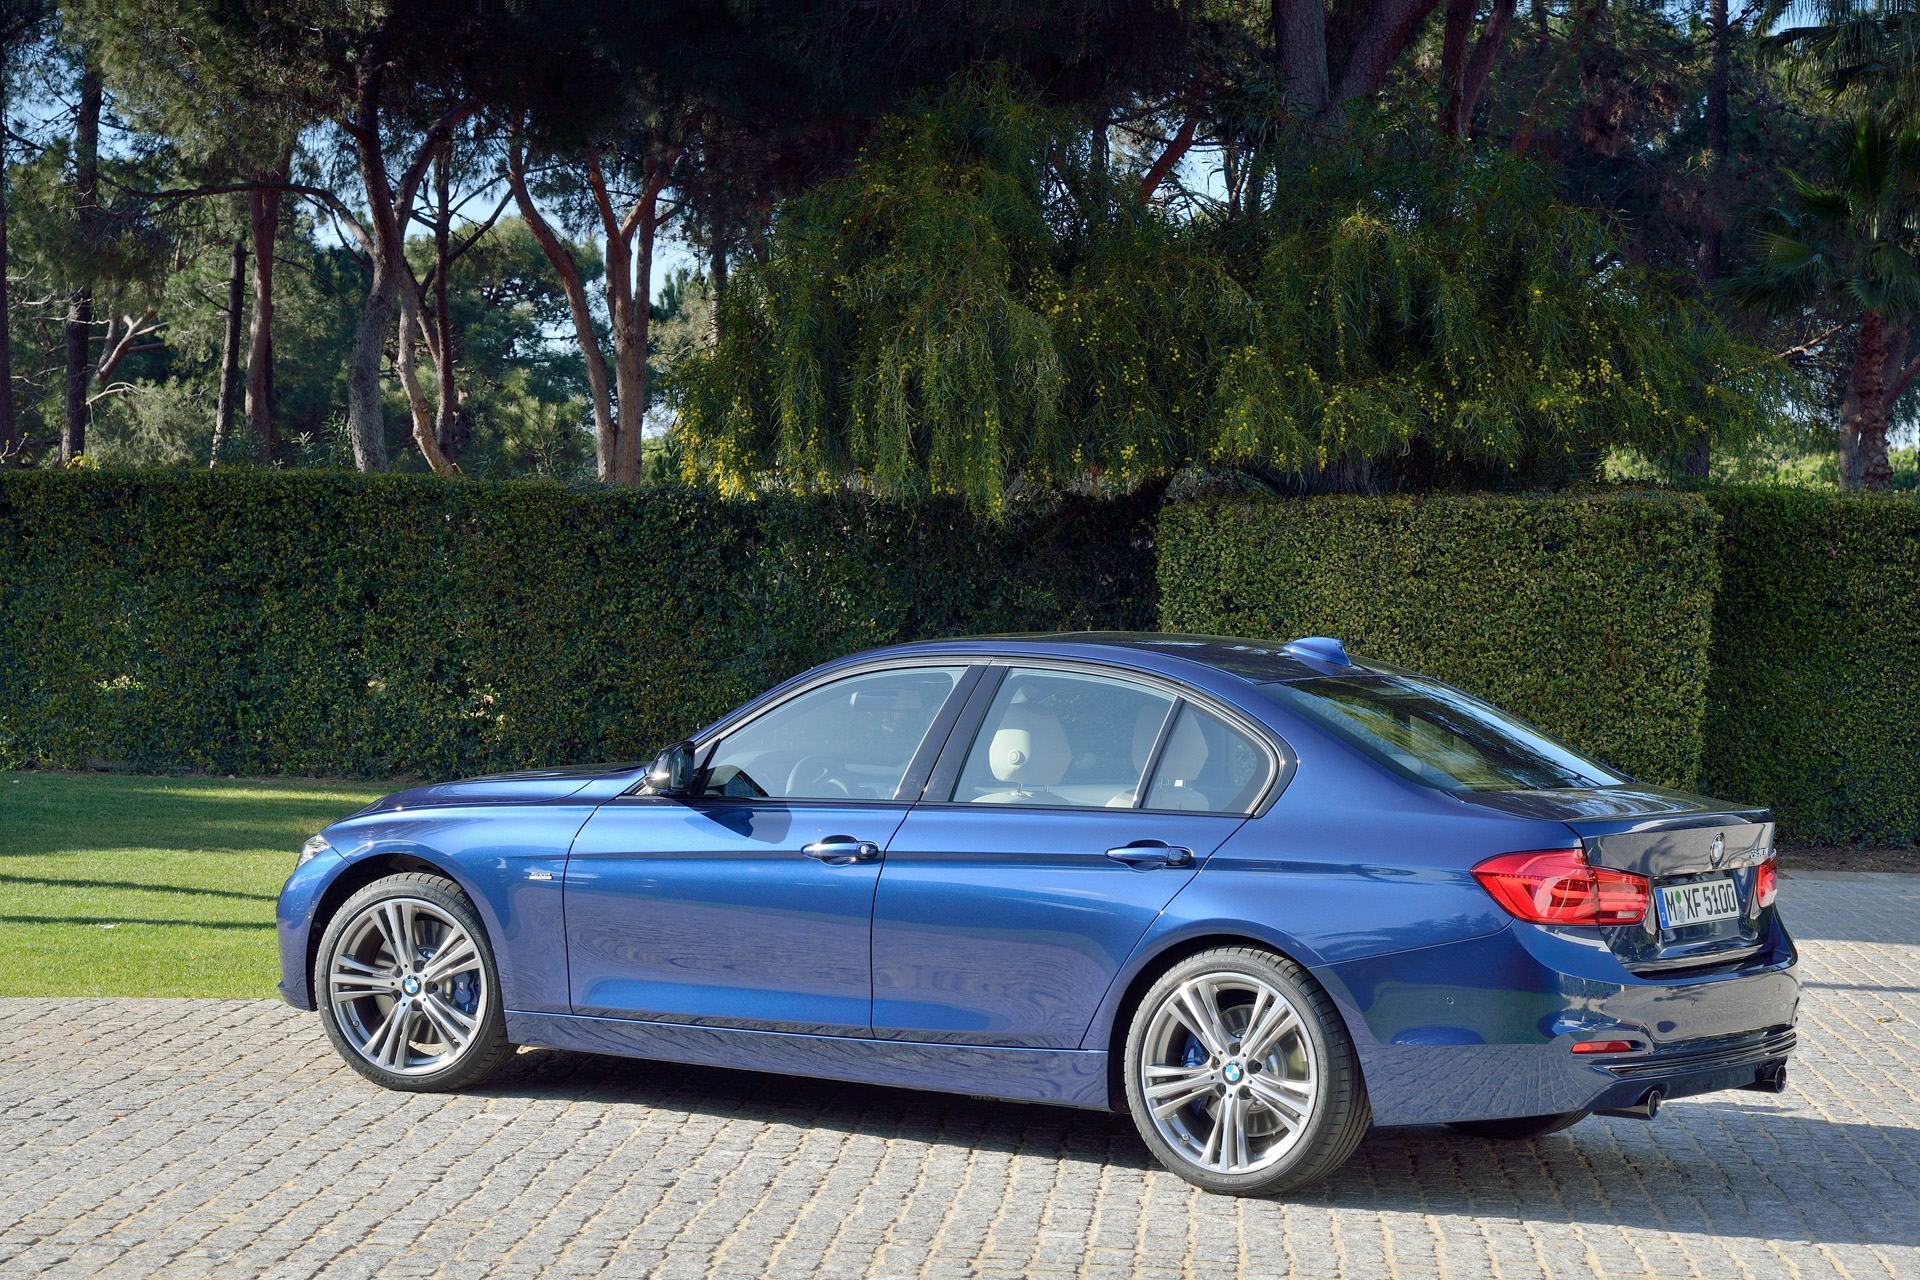 BMW F30 3 Series LCI: Information, Pictures and Videos